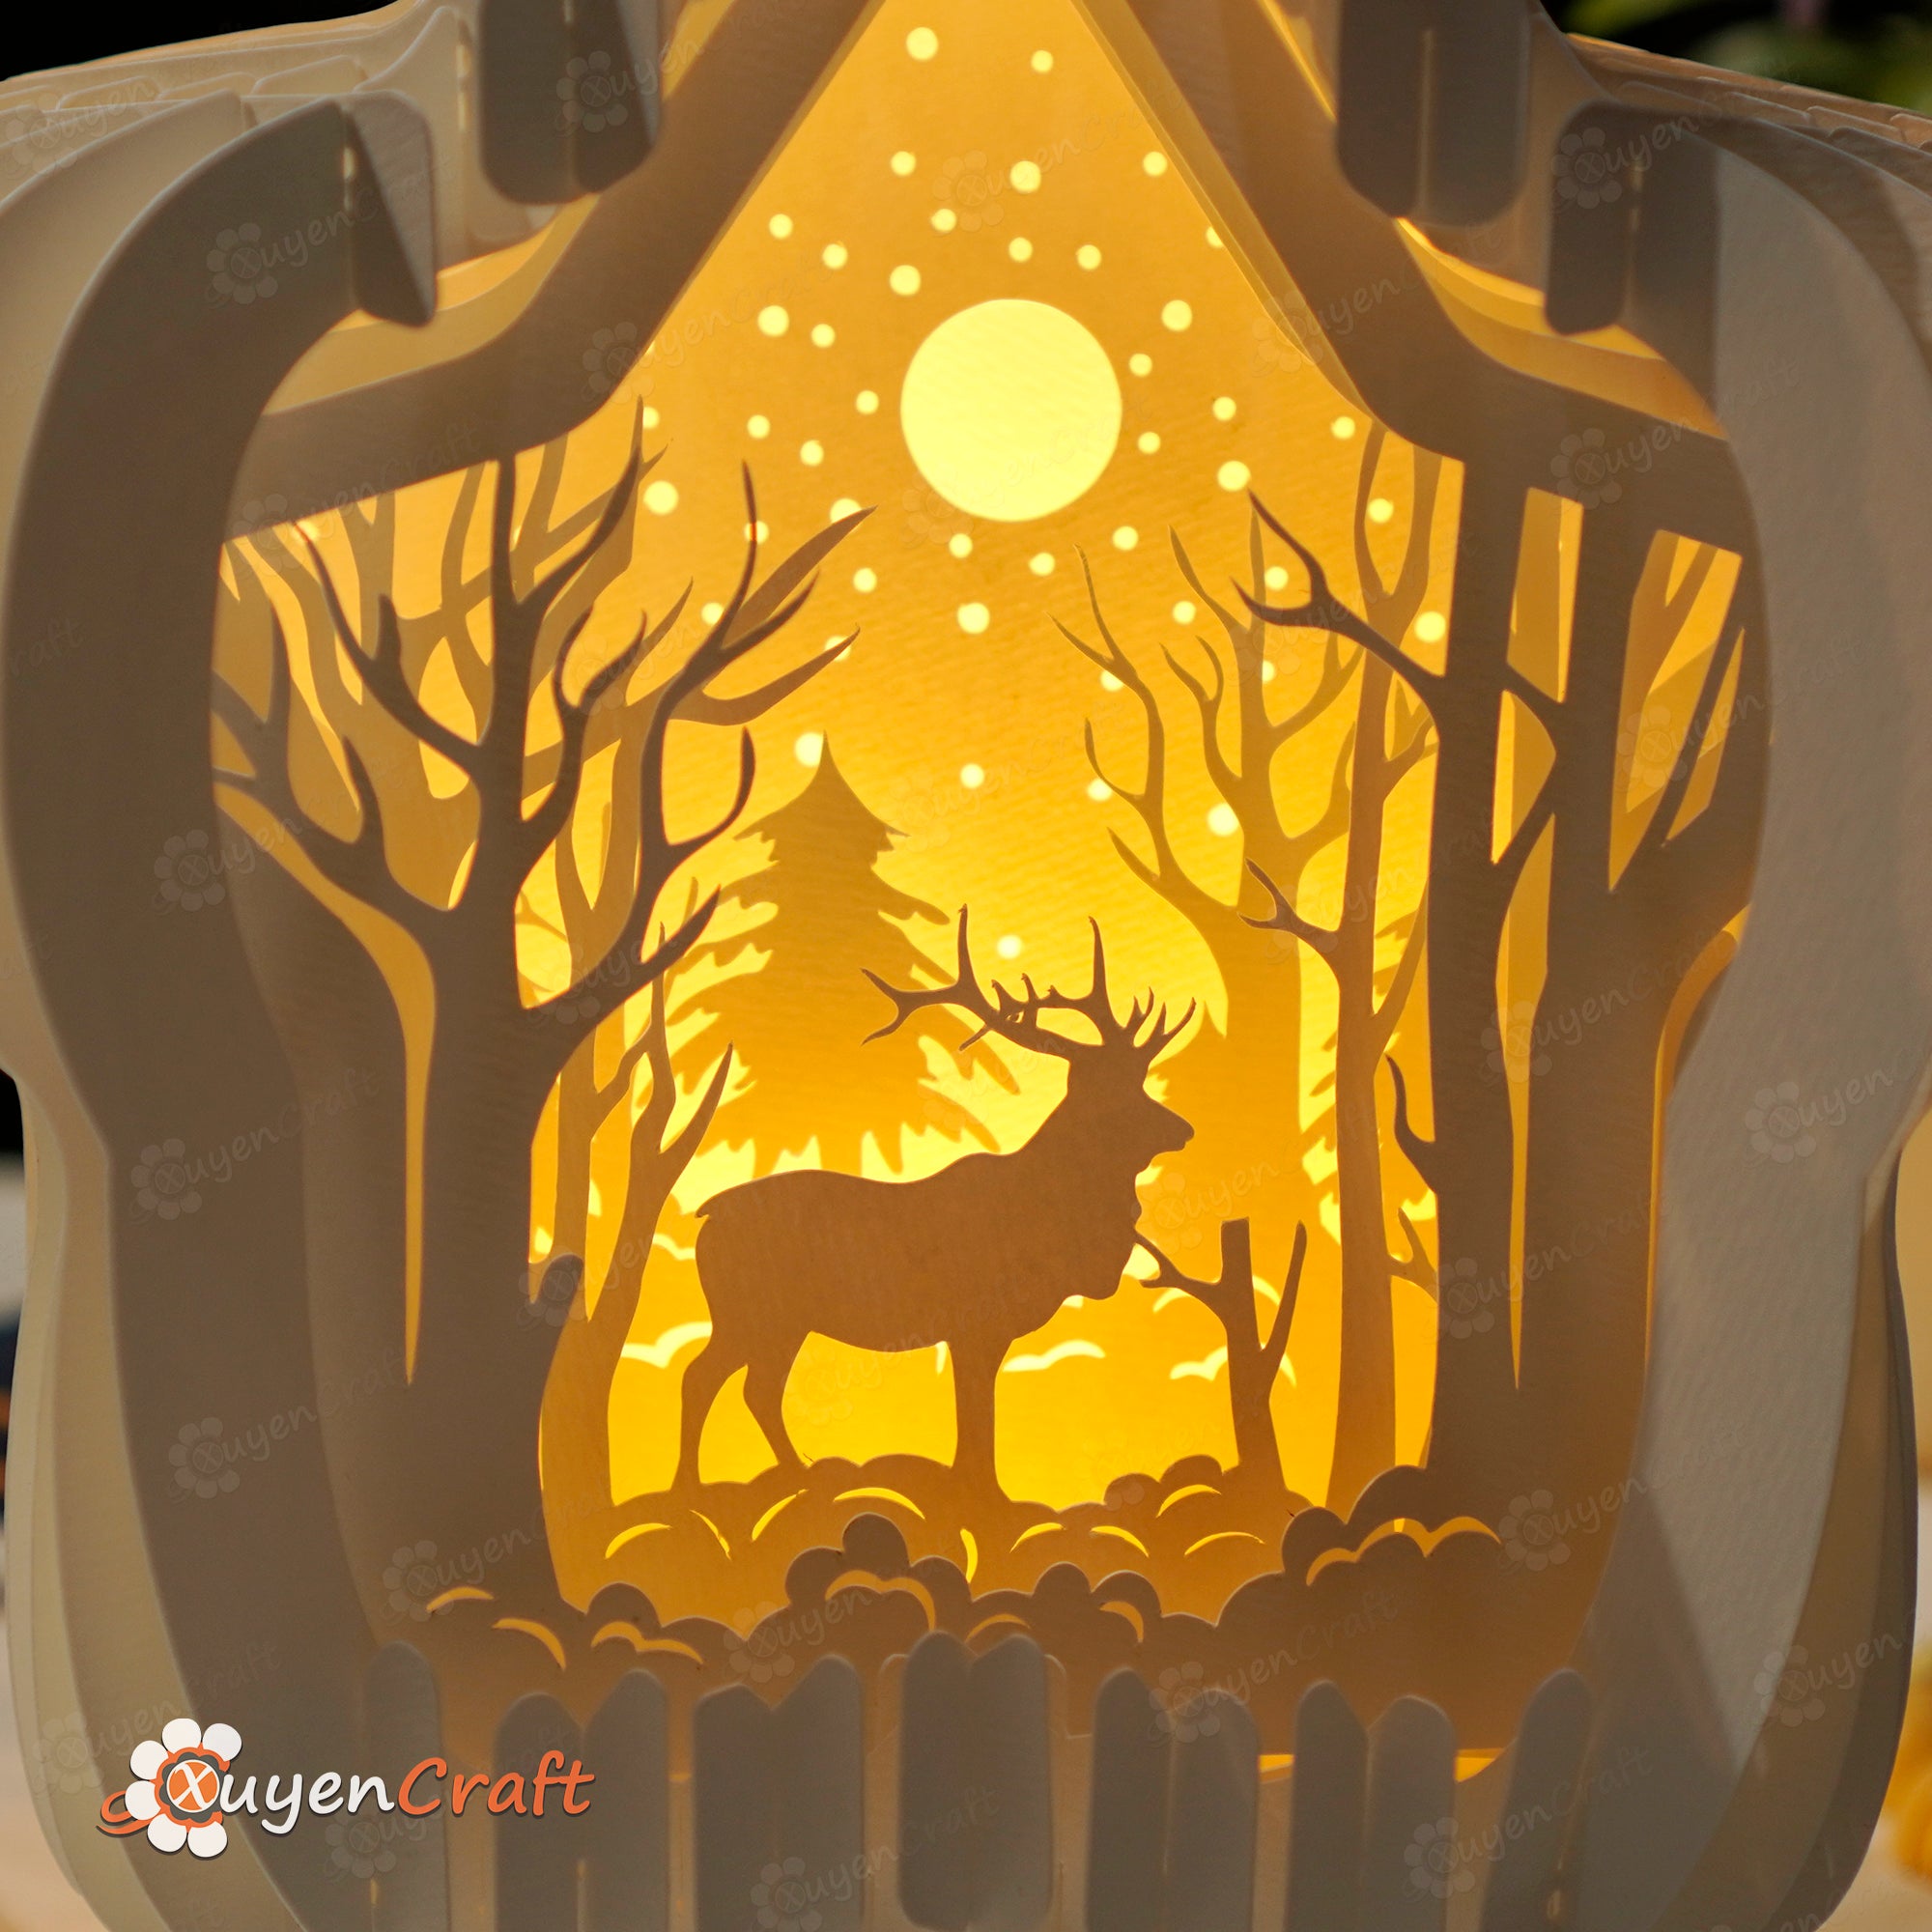 Deer Star Pop Up SVG, Silhouette Templates creating Star Lanterns for Forest Merry Christmas Decor